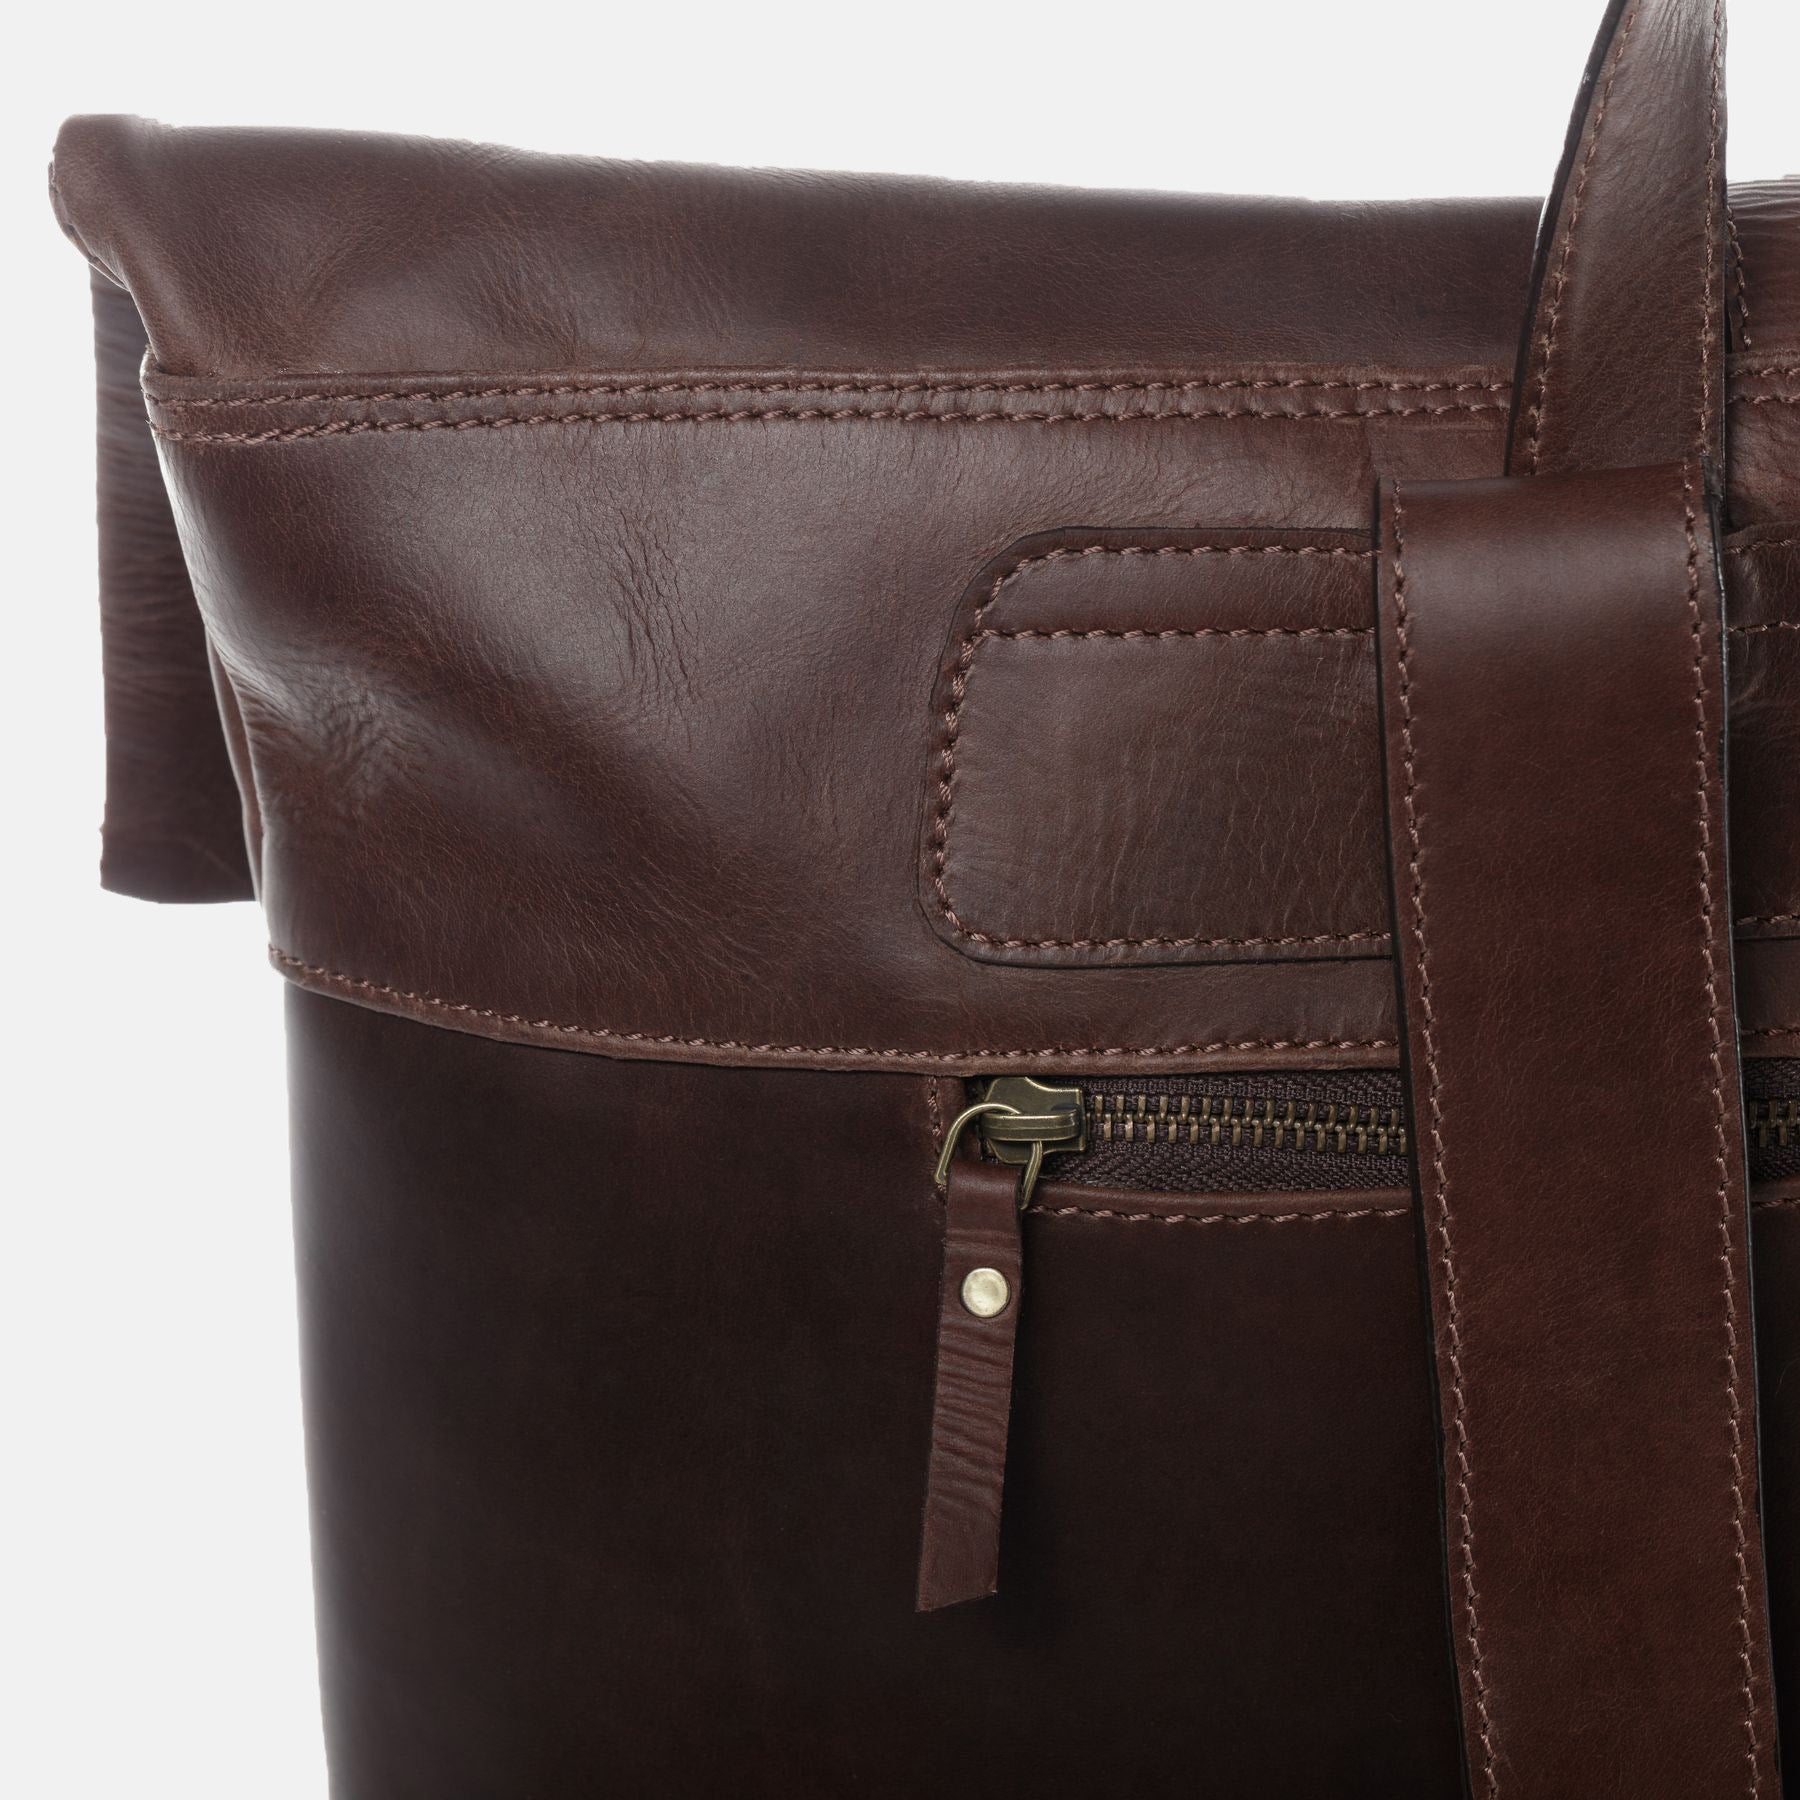 Rolltop backpack CLAY smooth leather brown